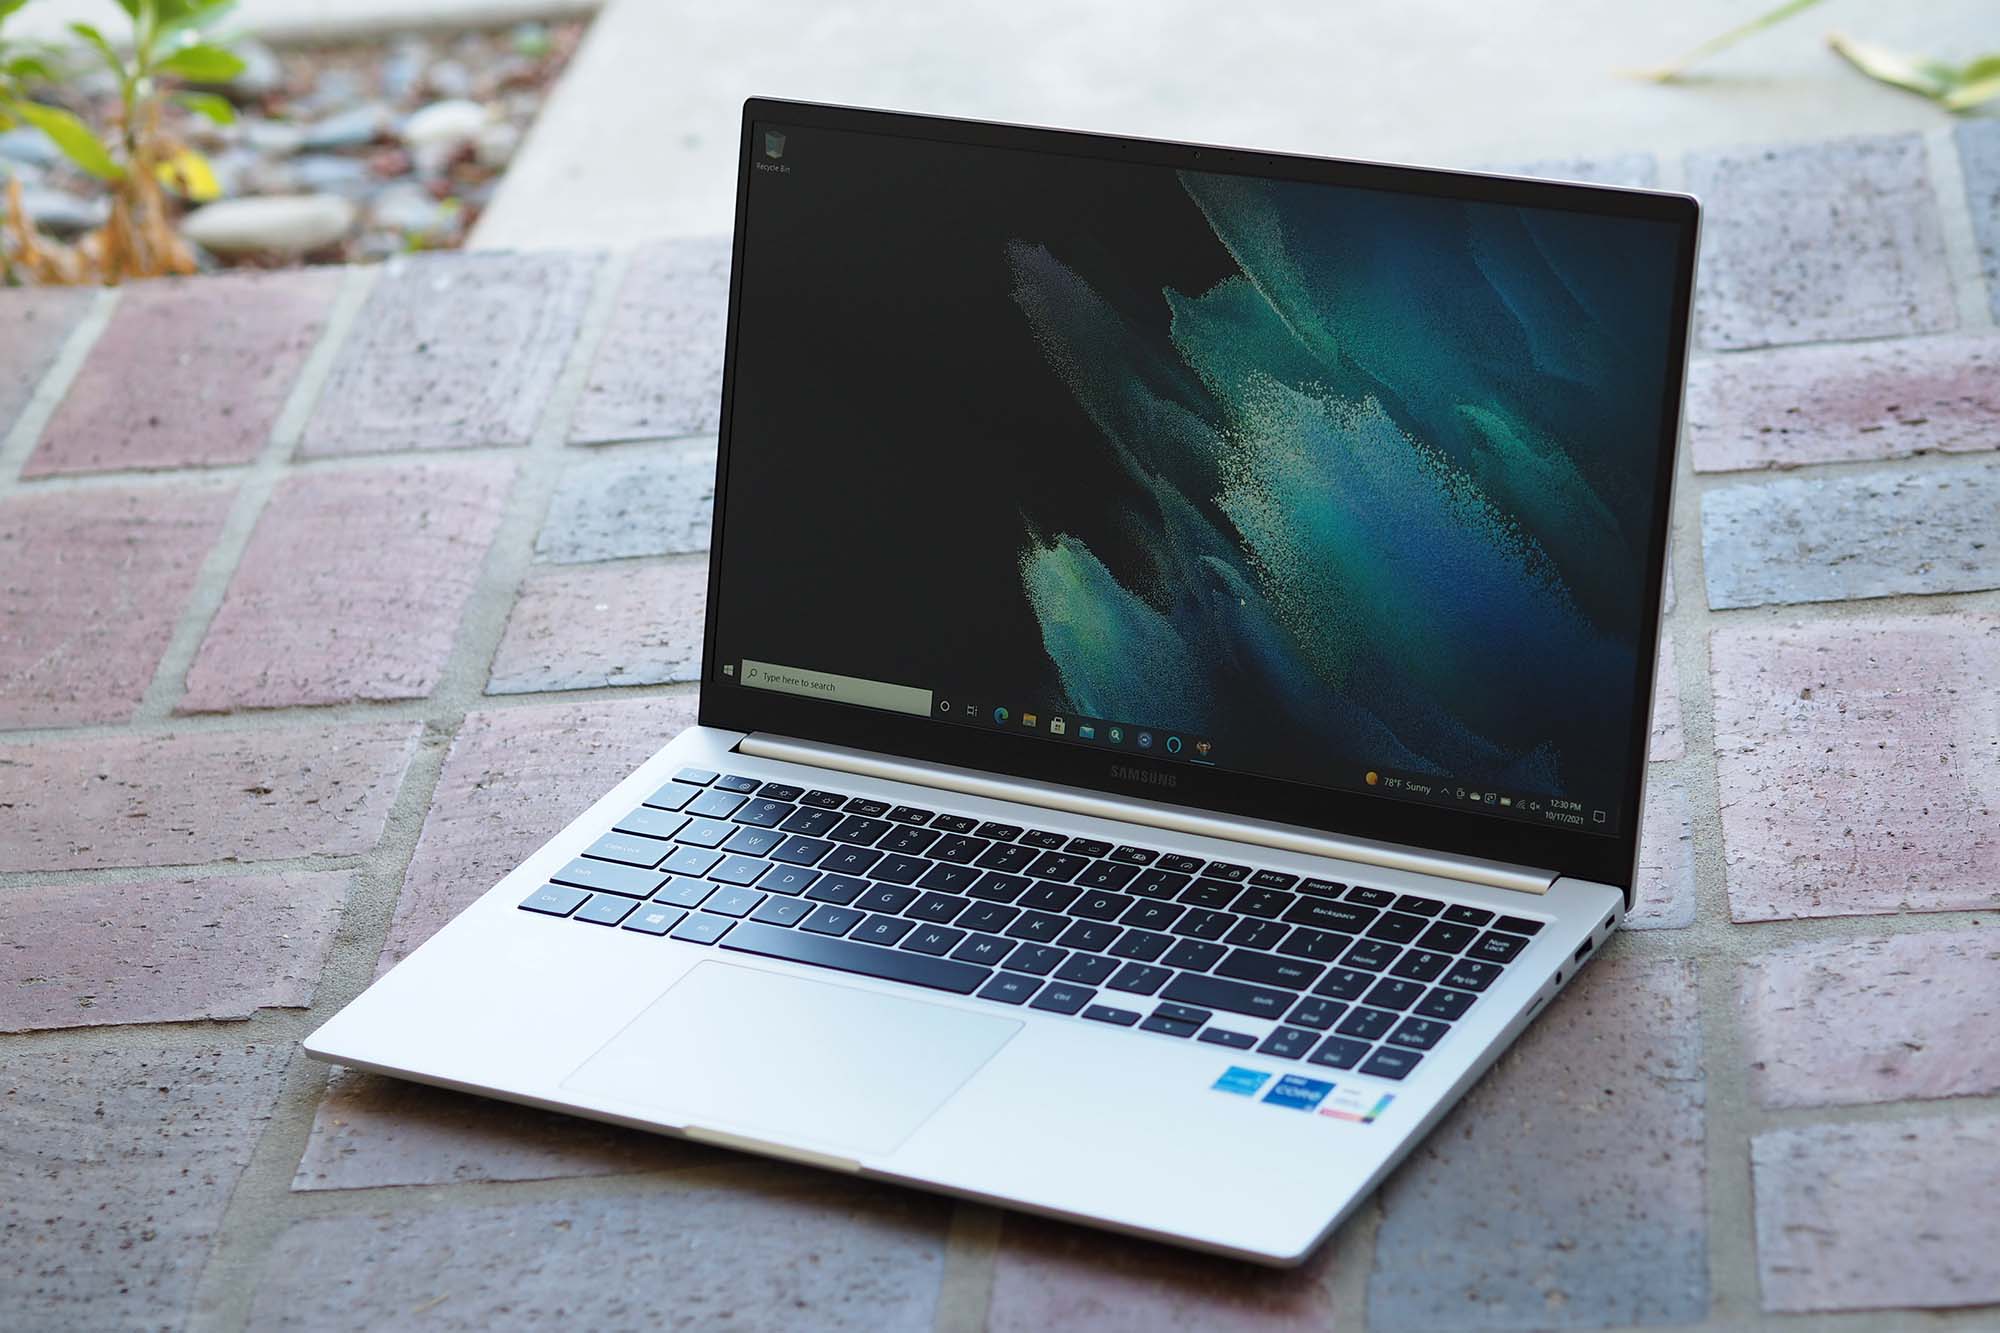 Samsung Galaxy Book Review: Too Many Compromises